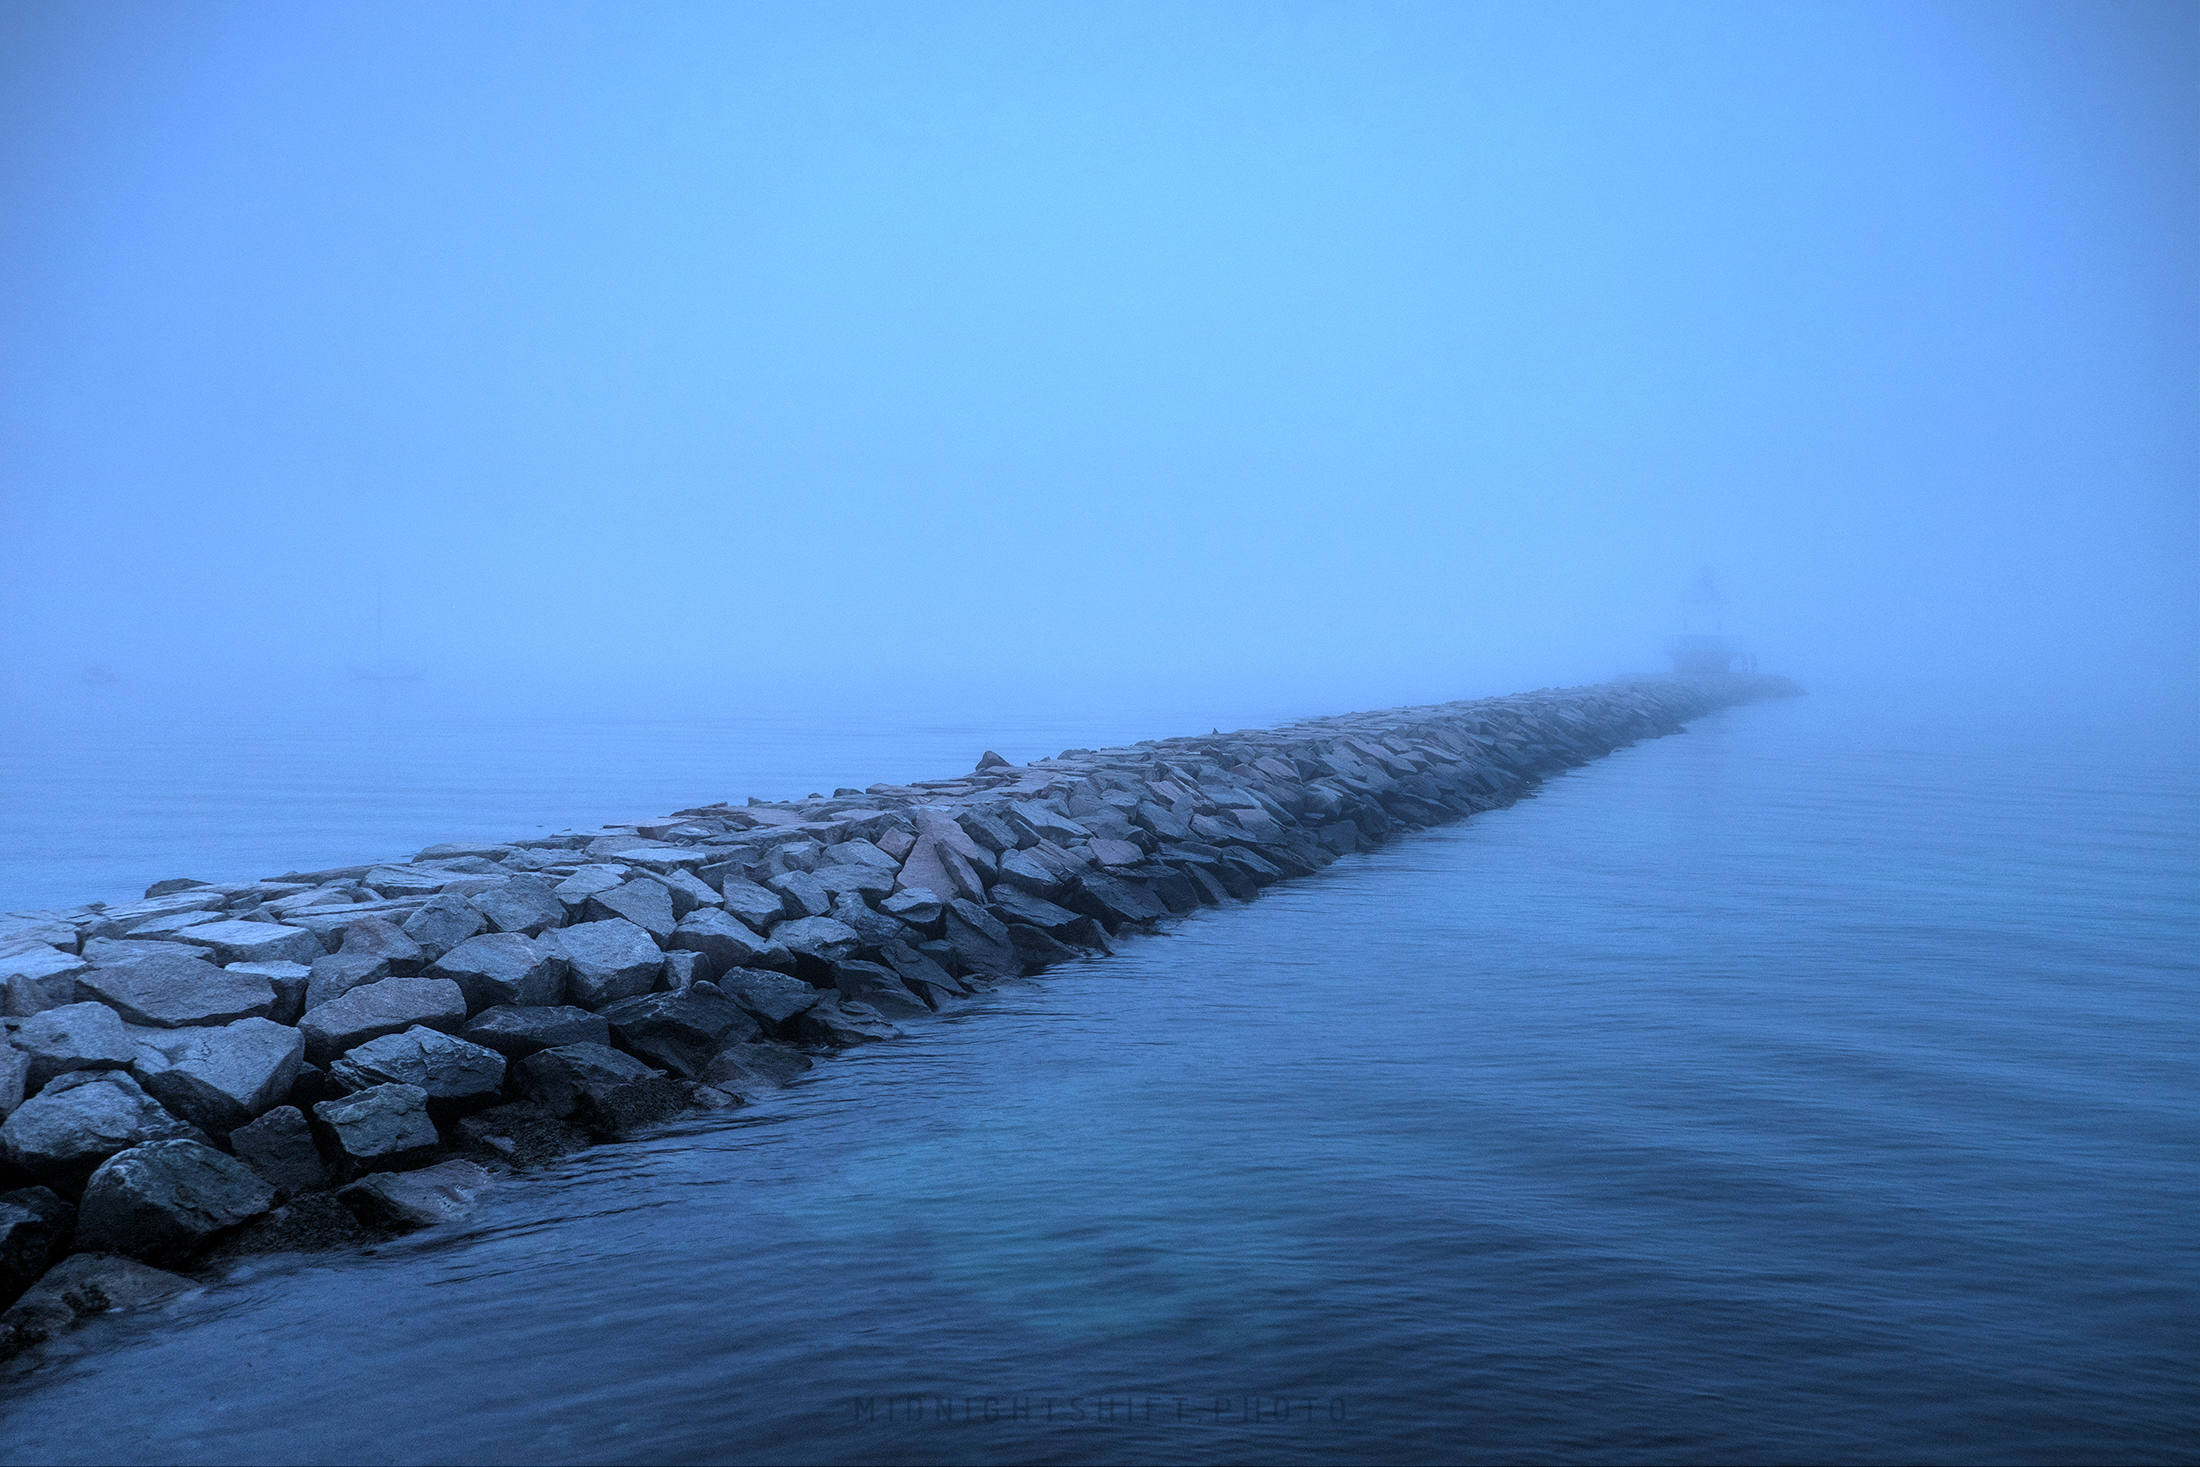 The spring point ledge lighthouse in South Portland, Maine sits in the dense fog.